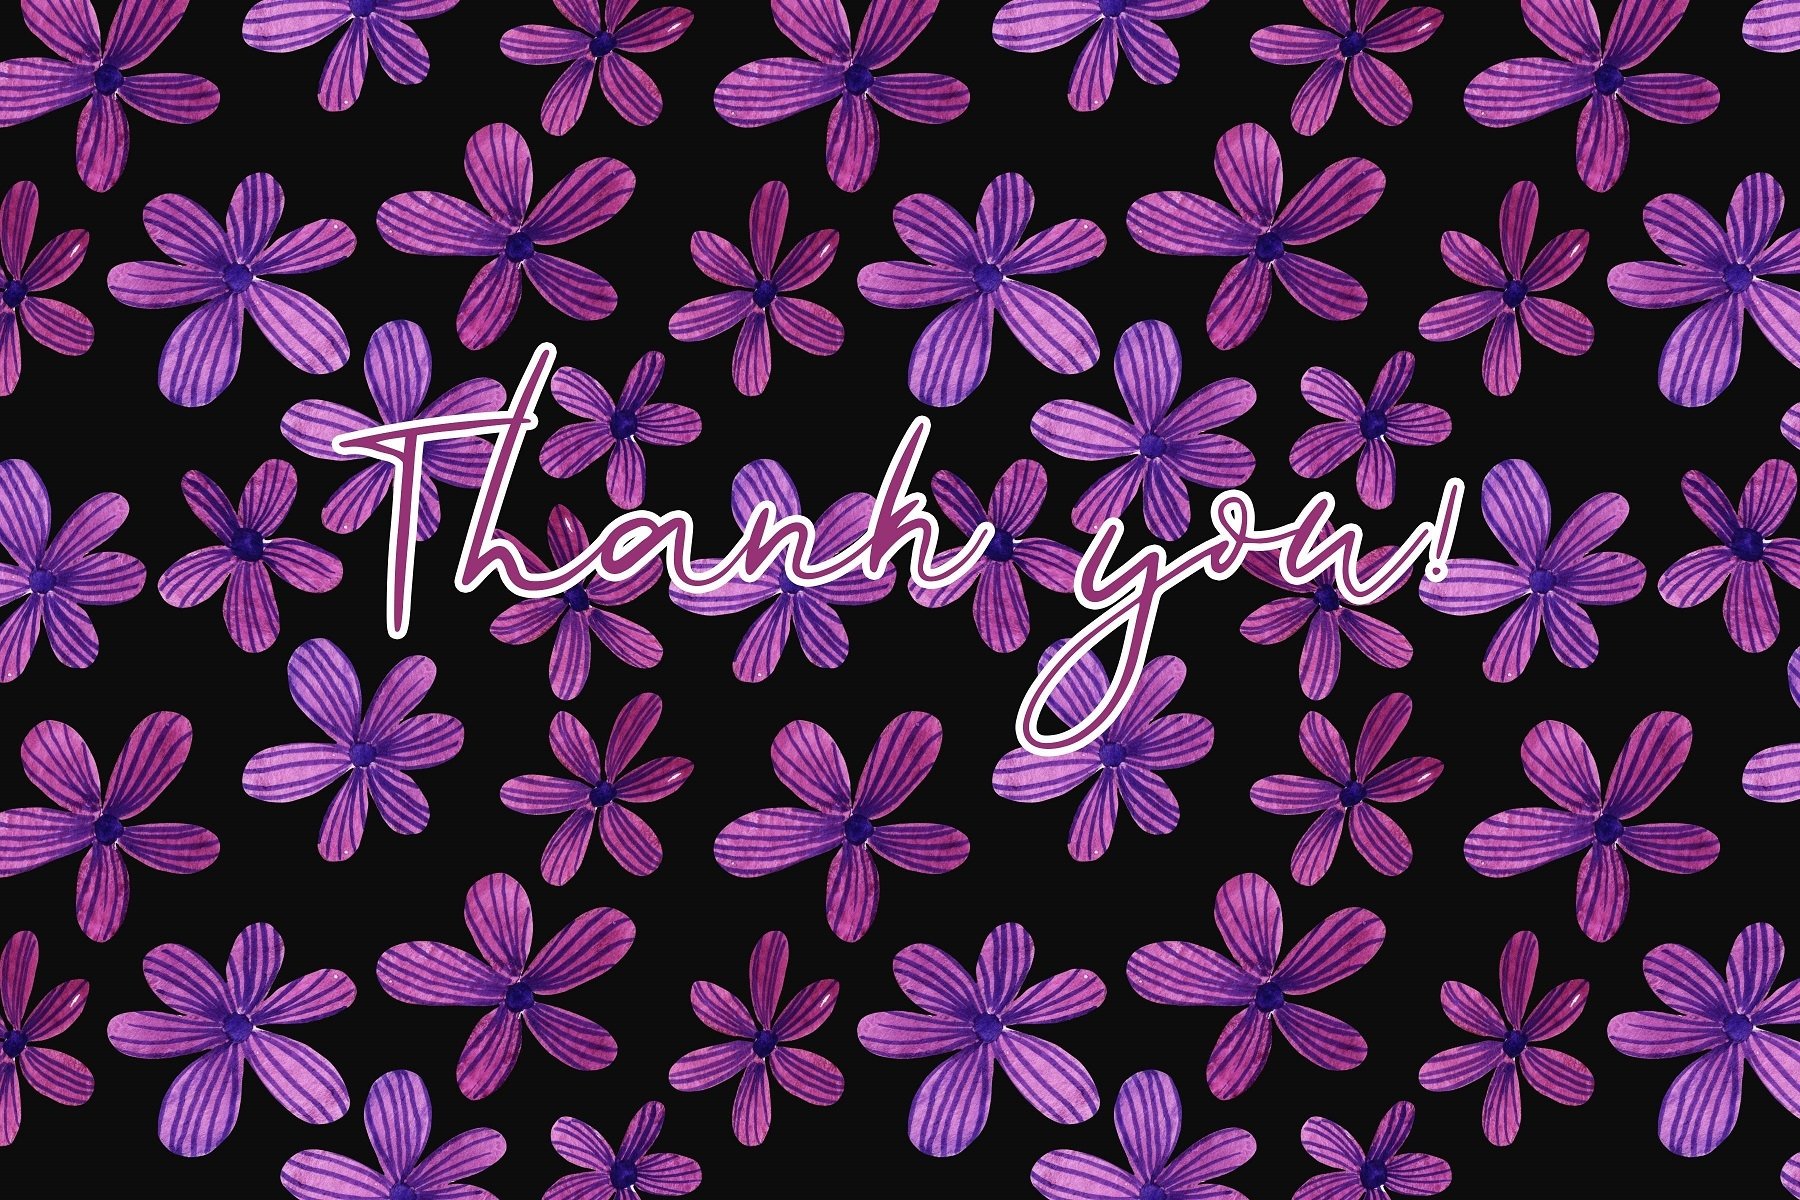 Thank card with purple flowers on a black background.